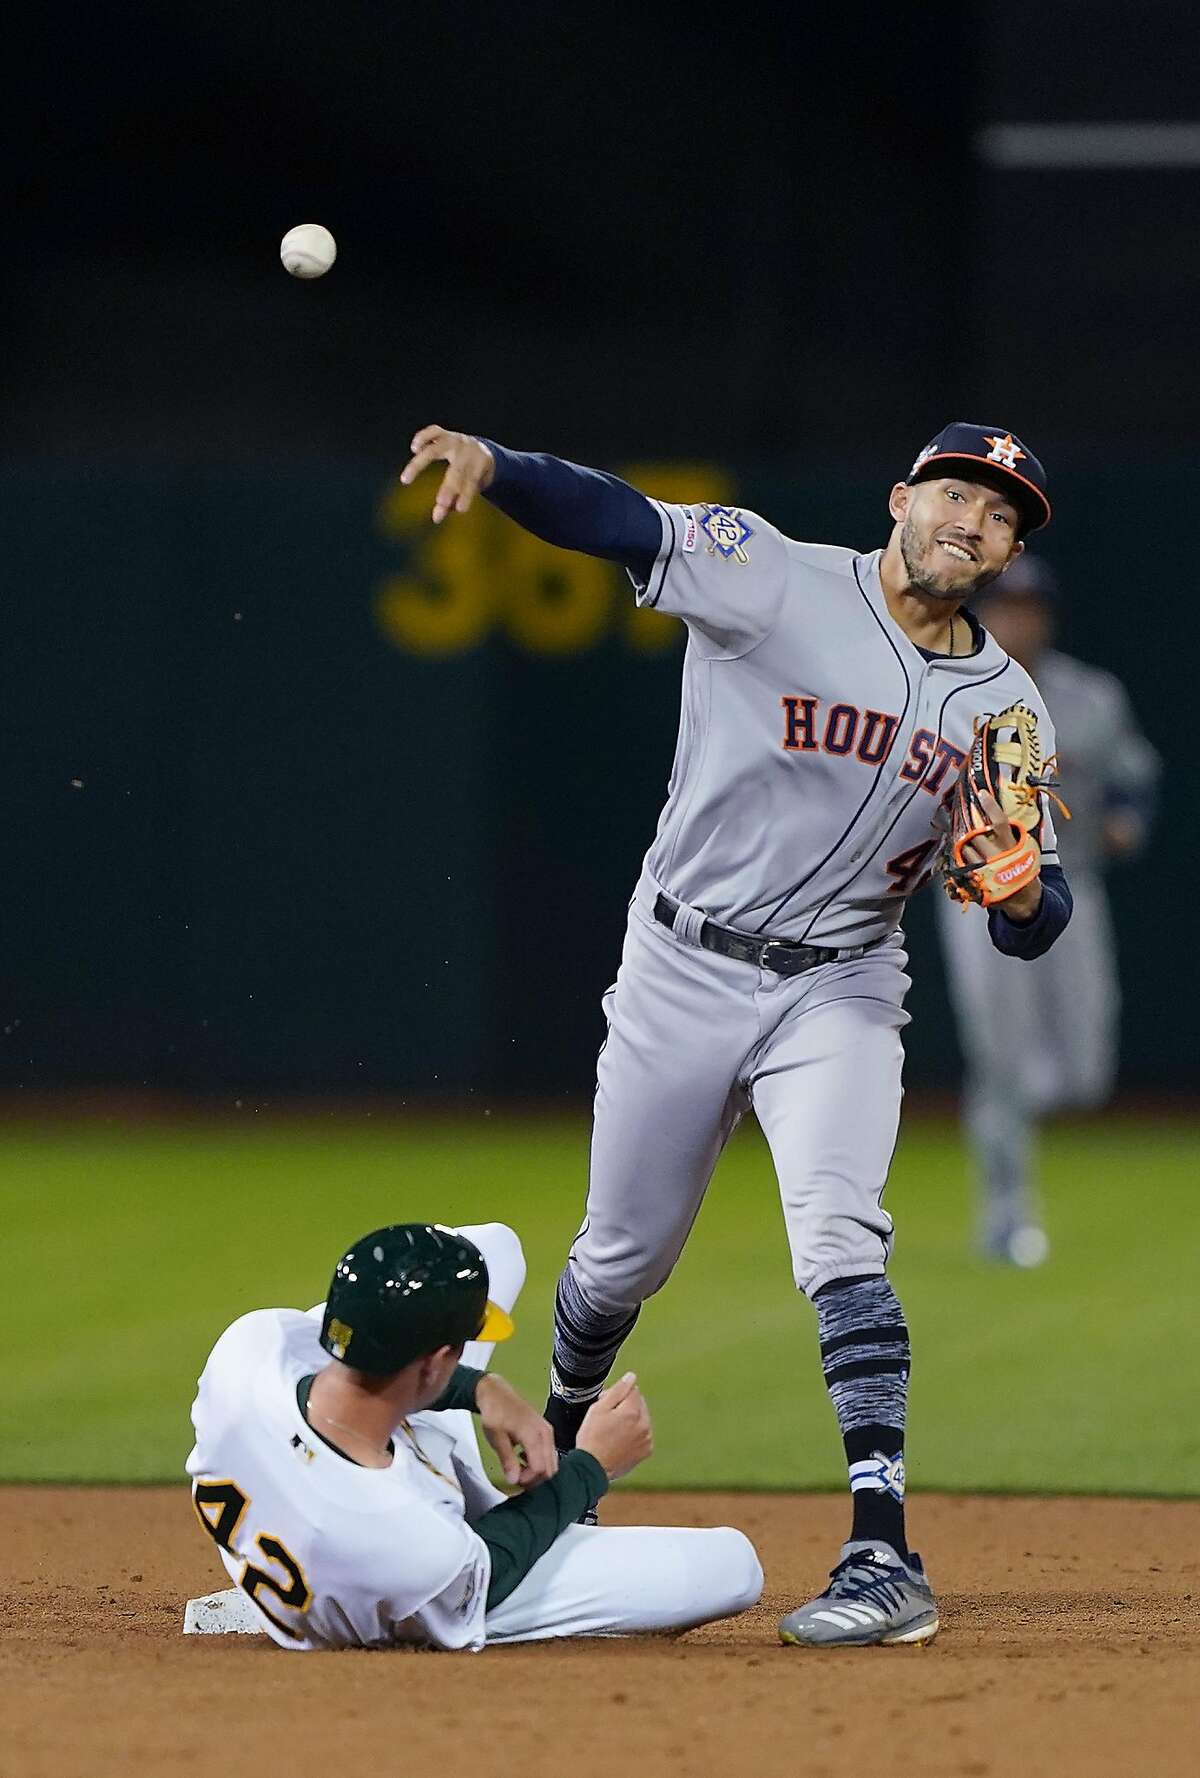 OAKLAND, CA - APRIL 16: Carlos Correa #1 of the Houston Astros completes the double-play throwing over the top of Stephen Piscotty #25 of the Oakland Athletics in the bottom of the fifth inning of a Major League Baseball game at Oakland-Alameda County Coliseum on April 16, 2019 in Oakland, California. All uniformed players and coaches are wearing number 42 in honor of Jackie Robinson Day. (Photo by Thearon W. Henderson/Getty Images)